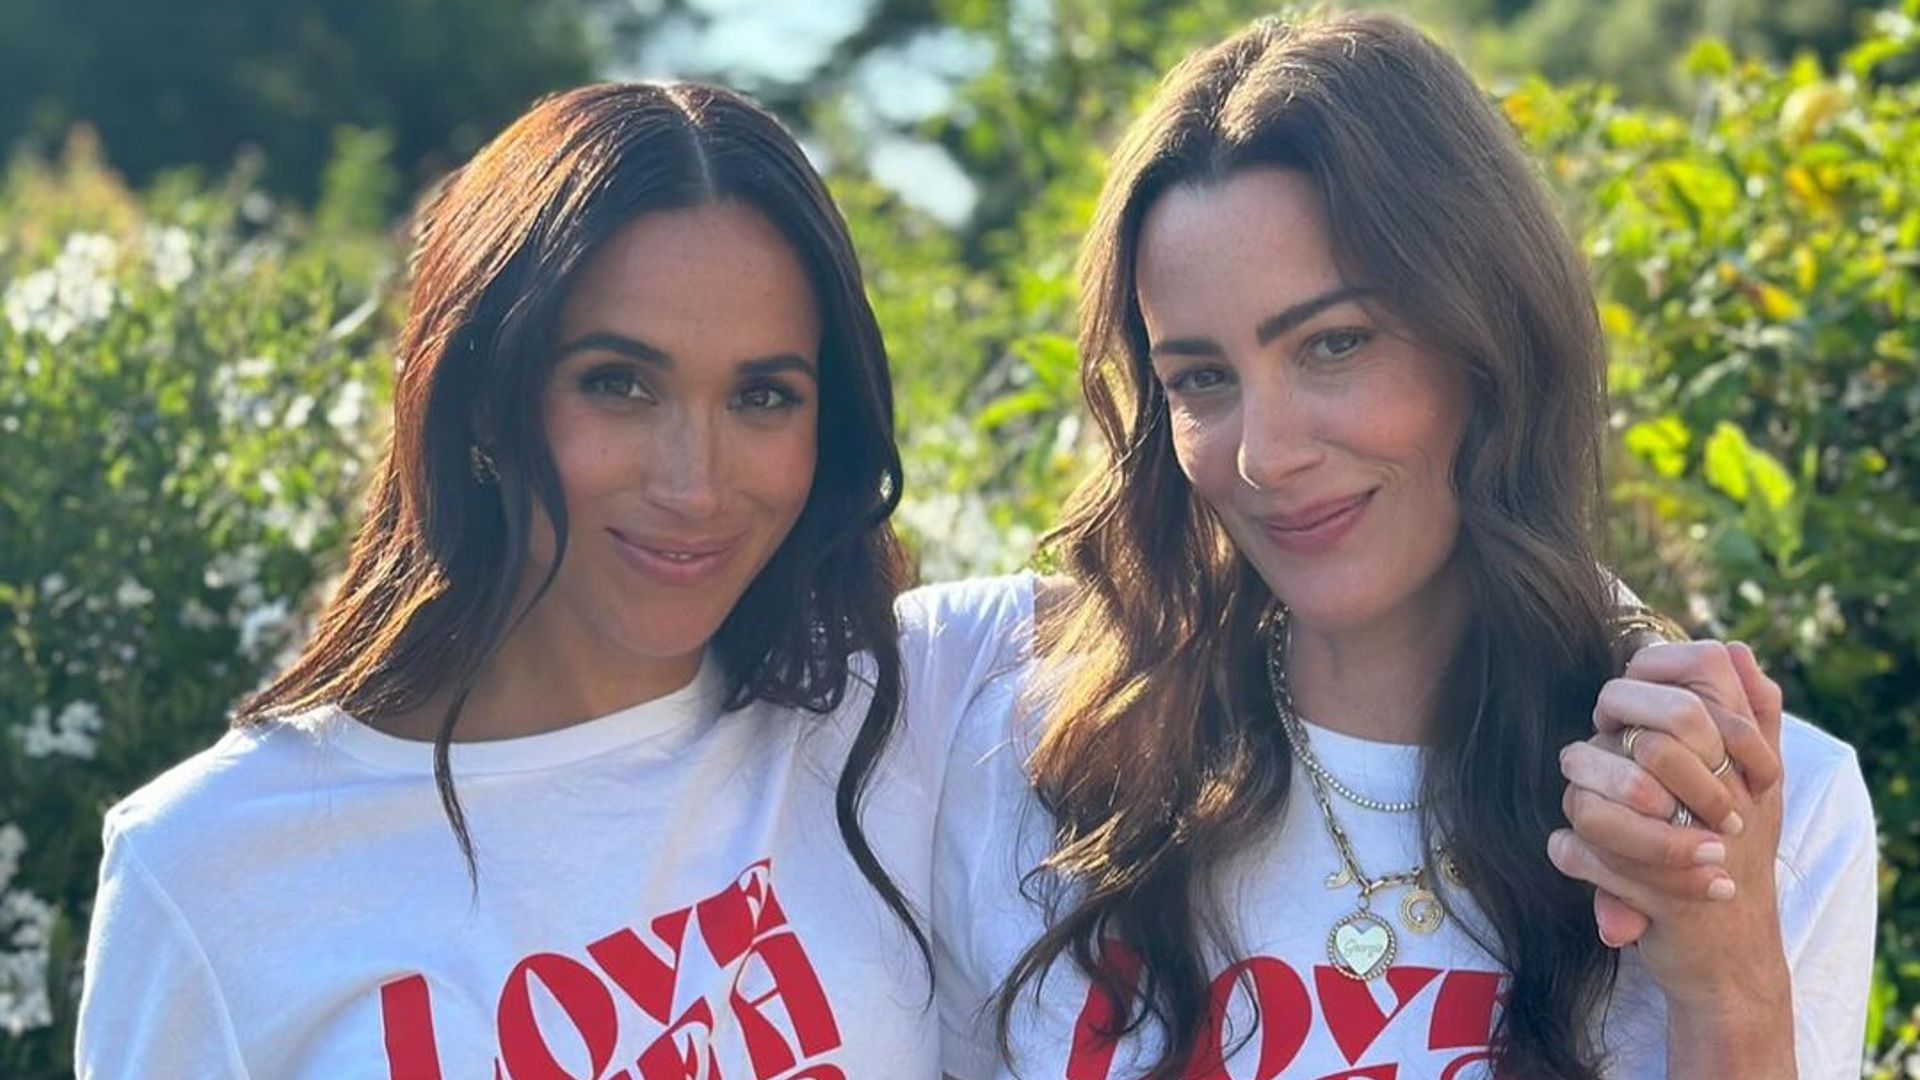 Meghan Markle posing with a friend wearing a t-shirt saying 'love like a mother'